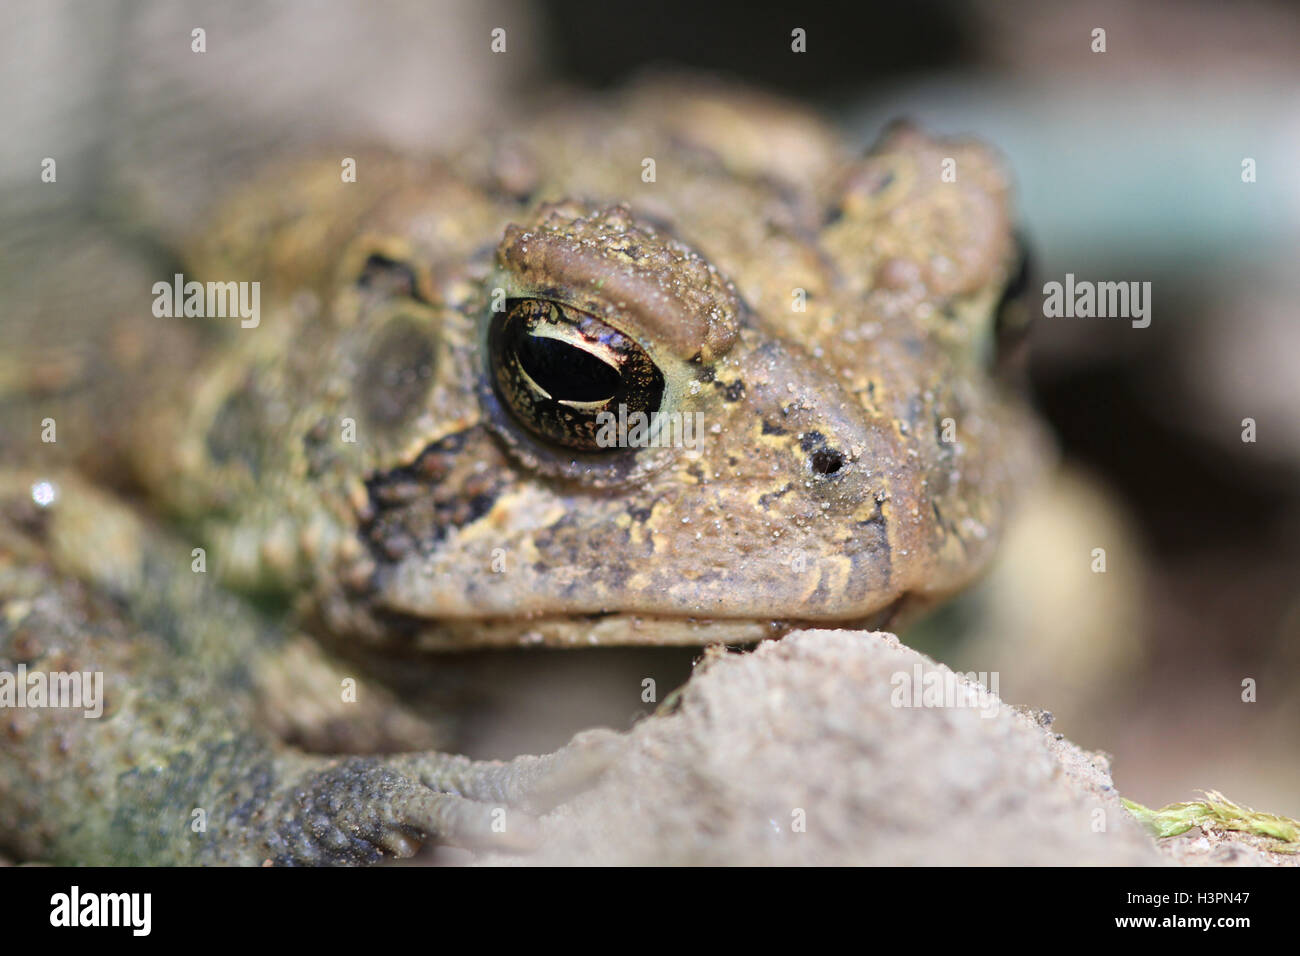 Toad Stock Photo